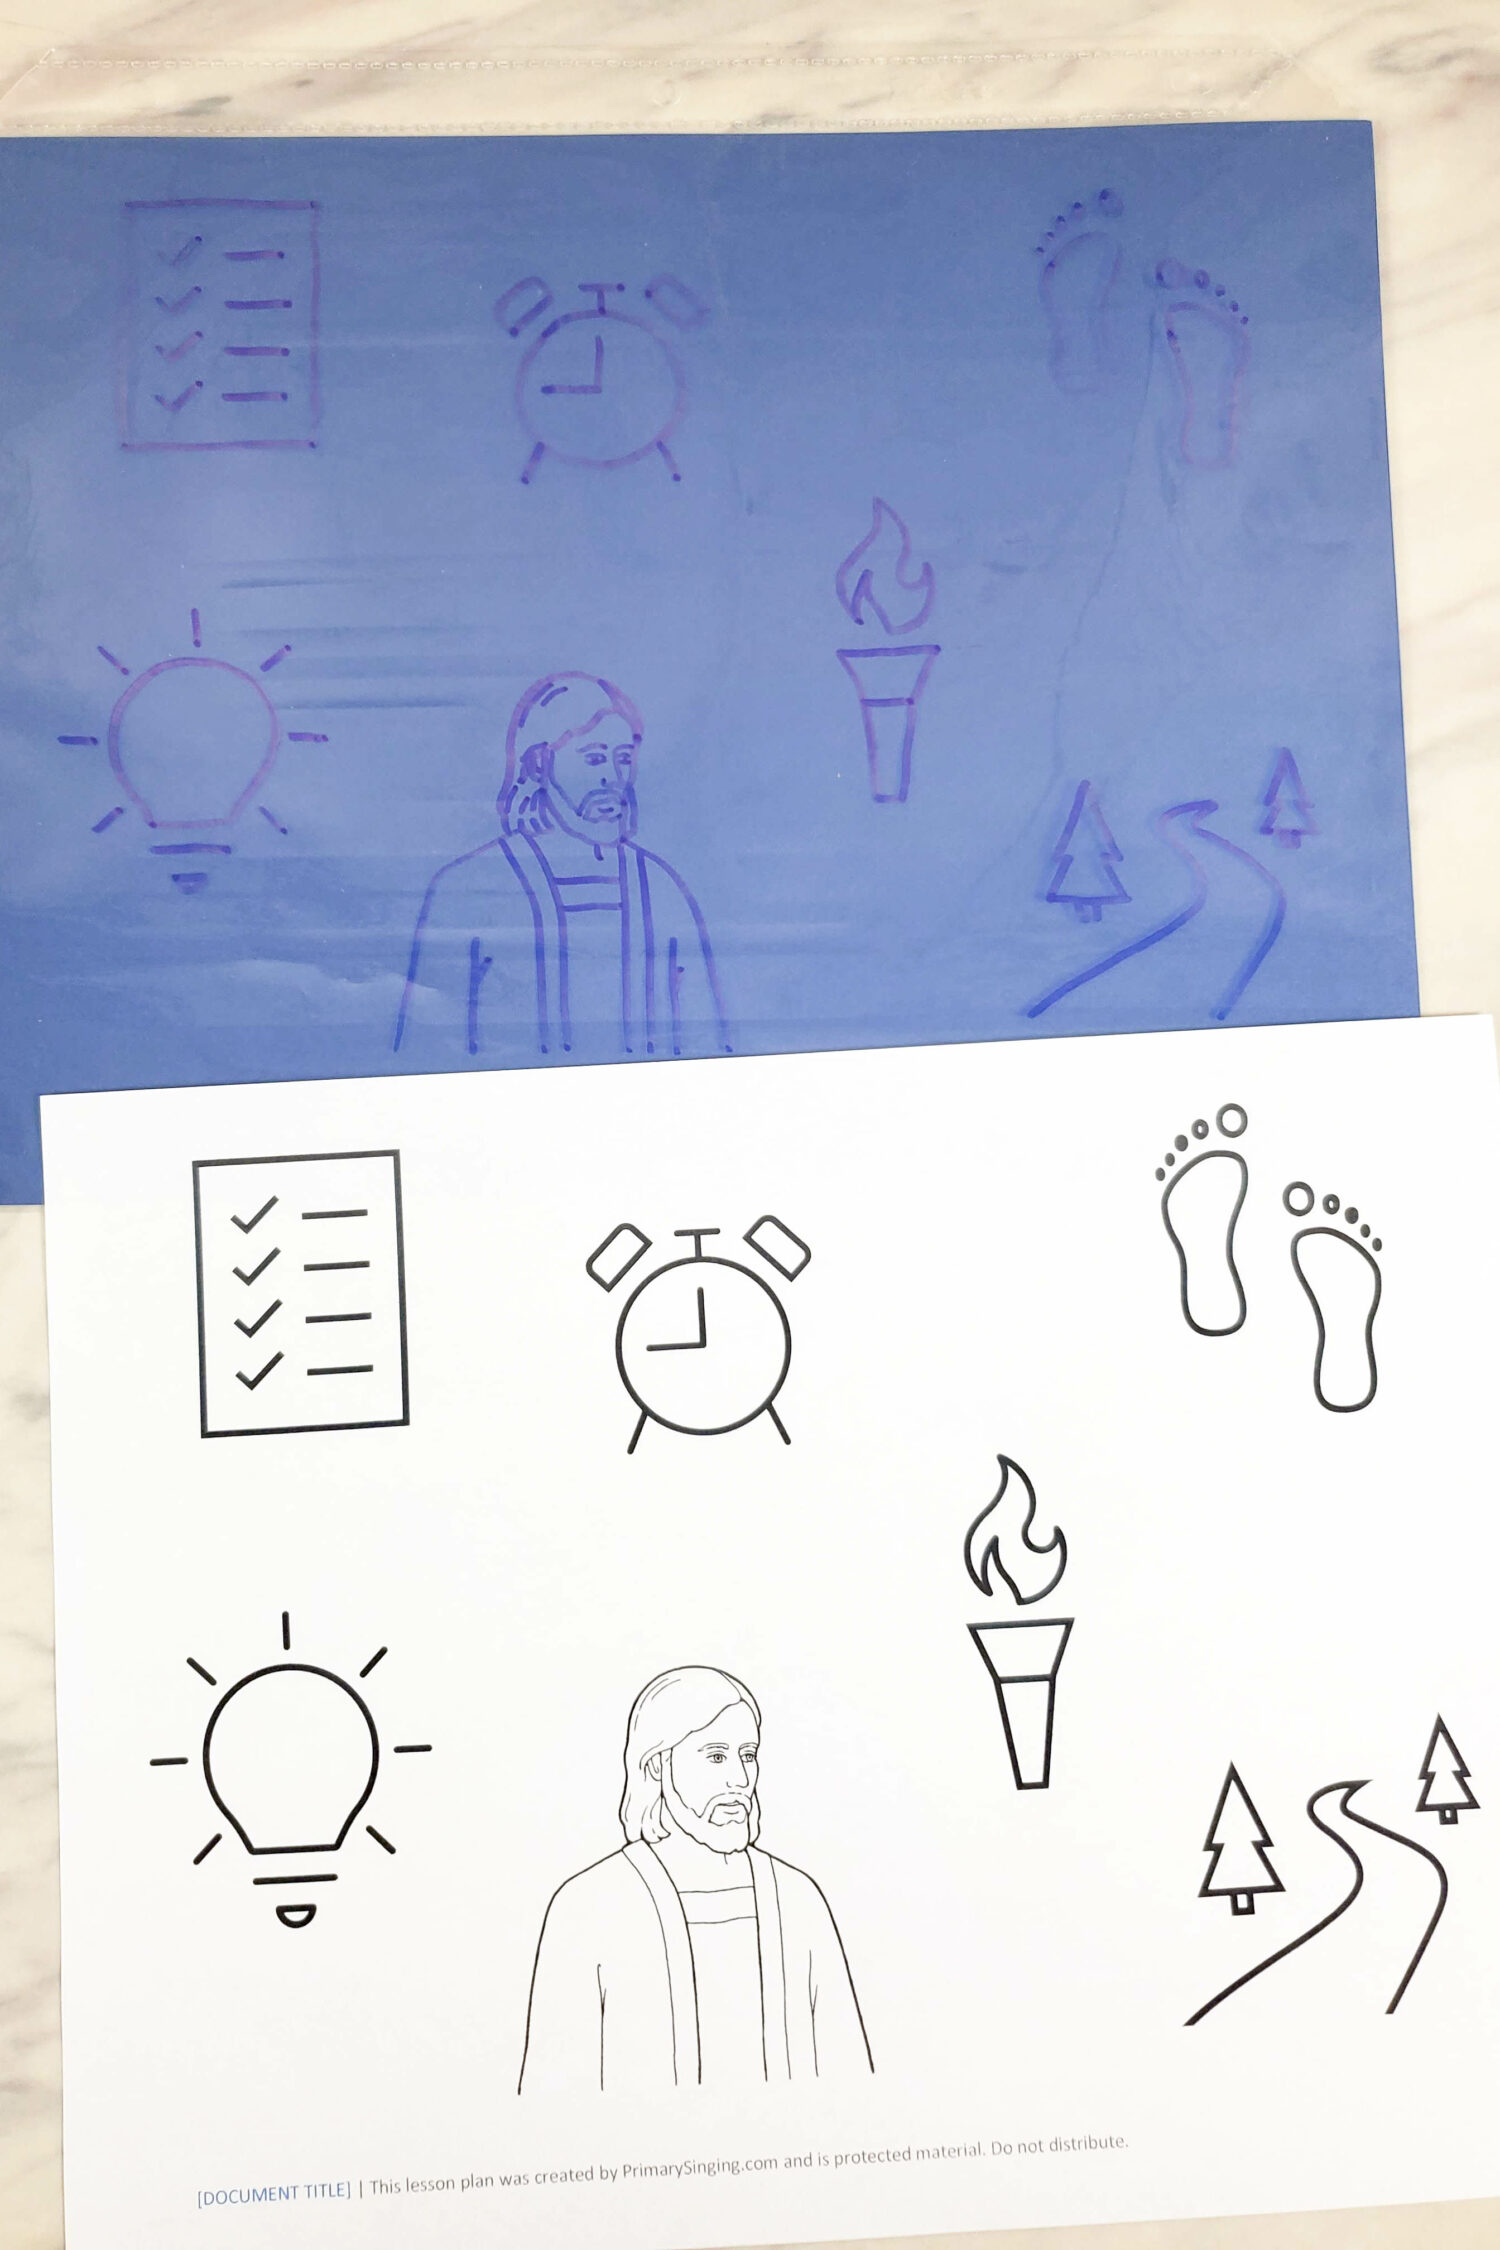 I Will Shine Flashlight Seek singing time idea with a printable template to help you create a magic hidden scene that you'll reveal one image at a time with the cutout flashlight that highlights each icon! Grab this printable template and follow along with our lesson plan for LDS Primary Music Leaders.